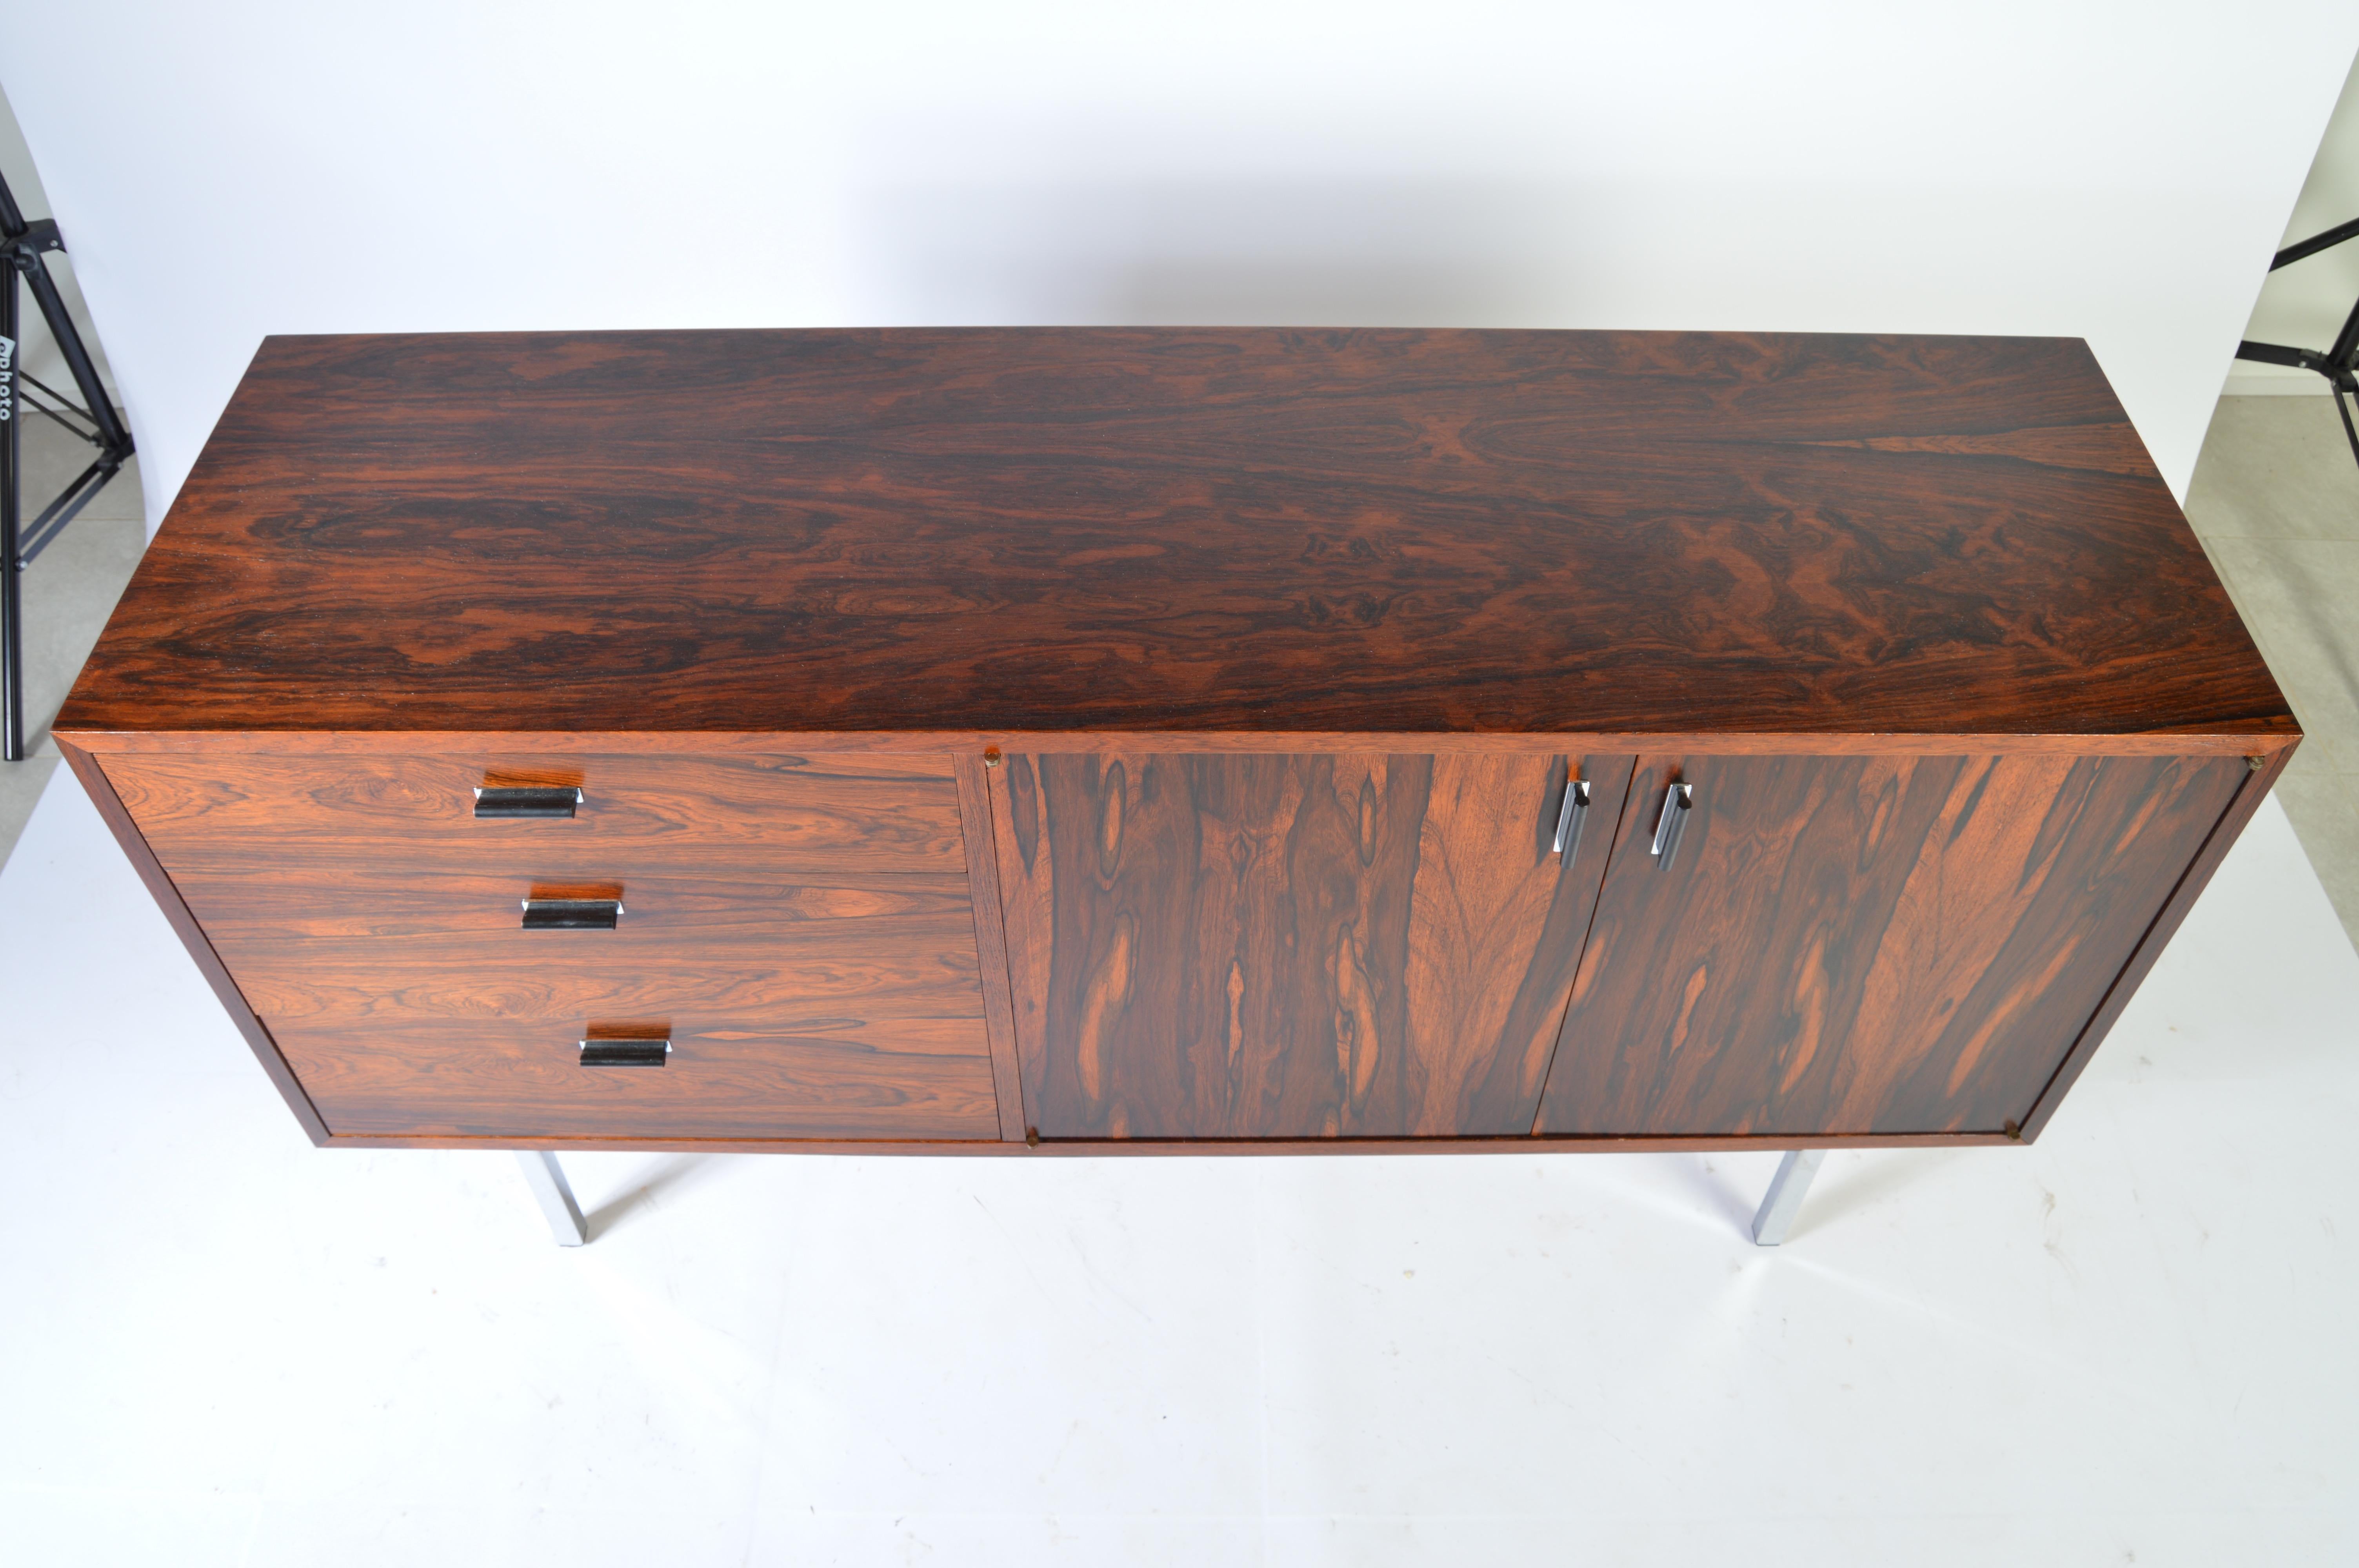 Stunning grain having book matched drawers and doors. Masterfully refinished.
A truly stunning credenza in the manner of Harvey Probber.